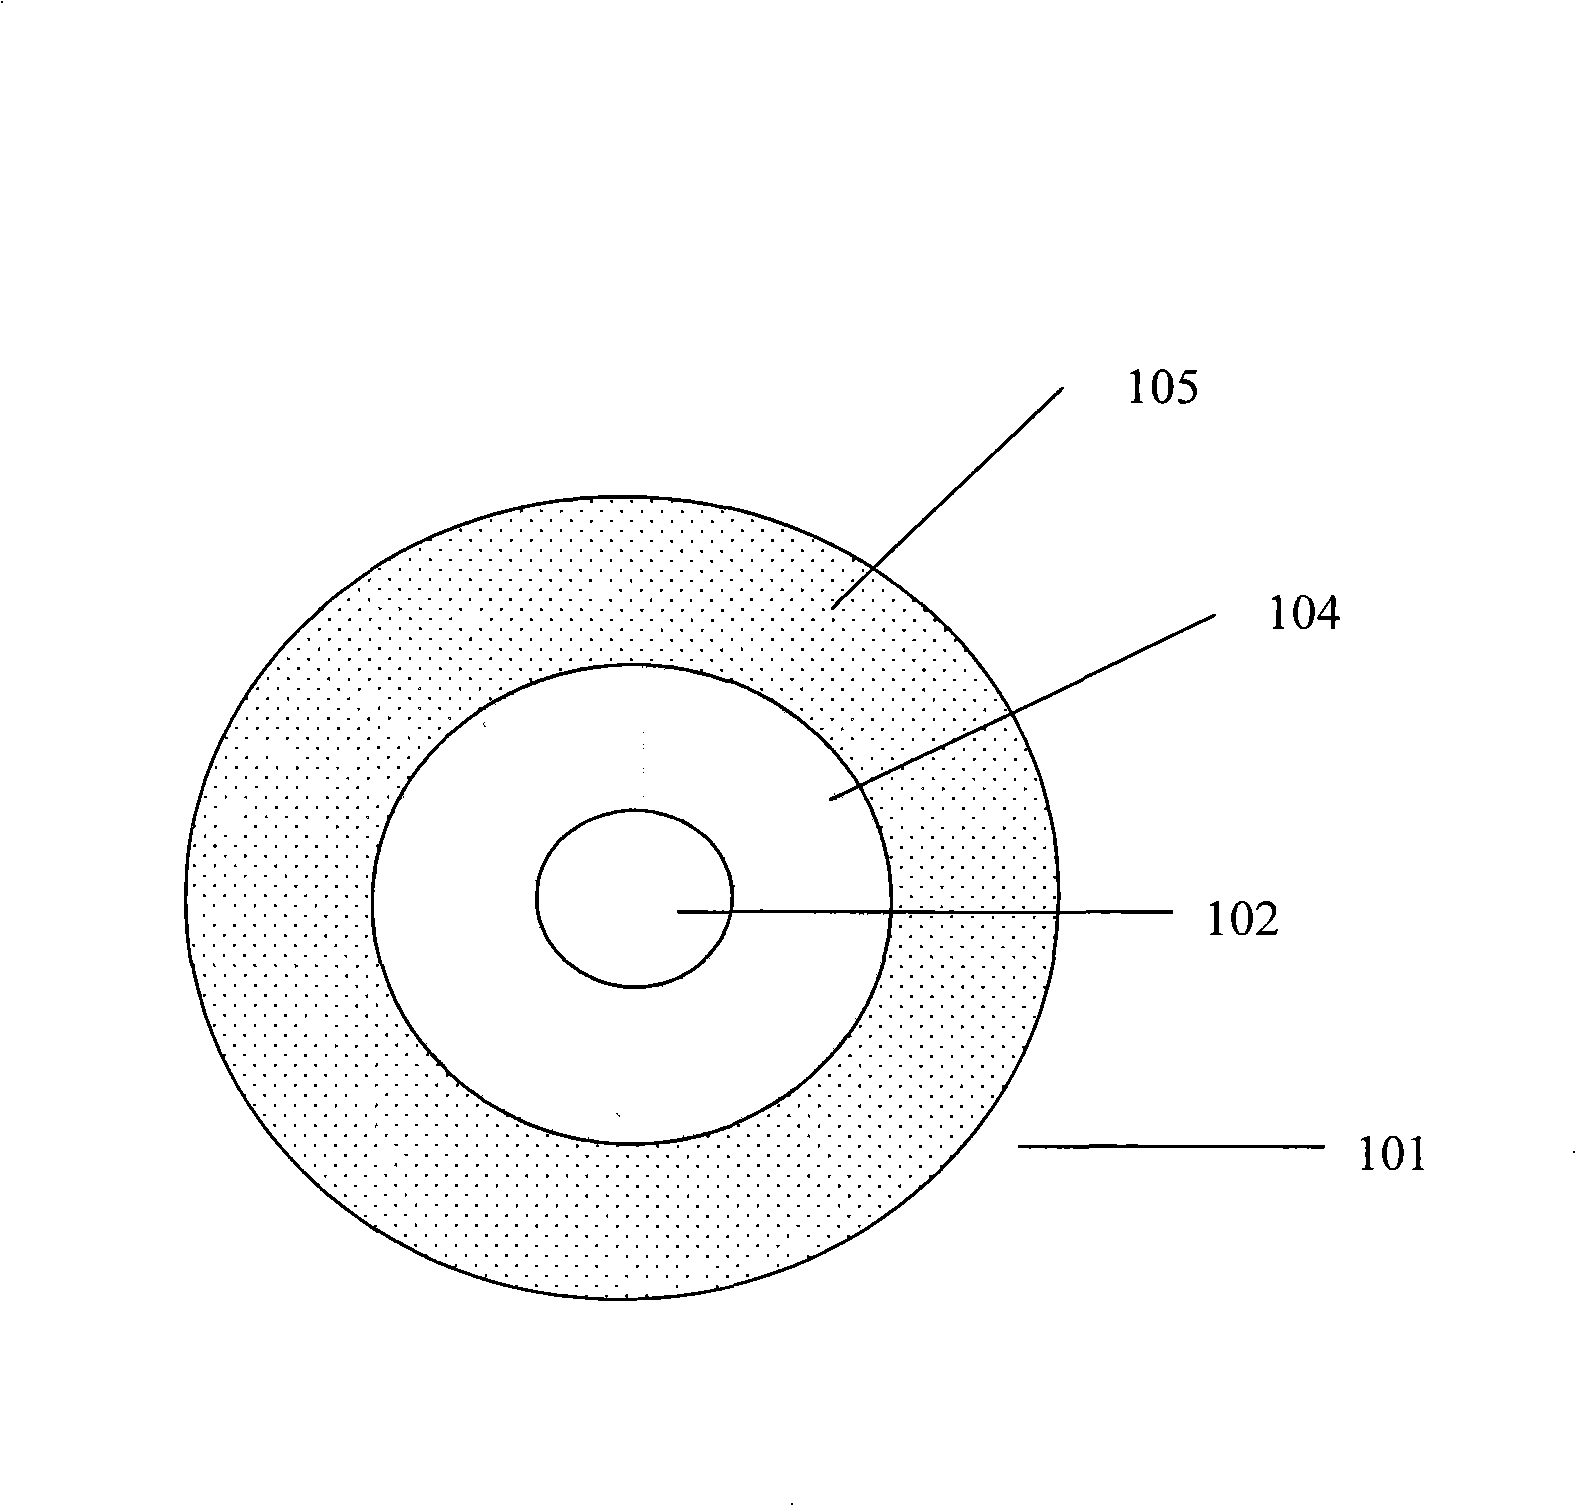 Optical fiber having low and uniform optical loss along the entire length and method for fabricating the same